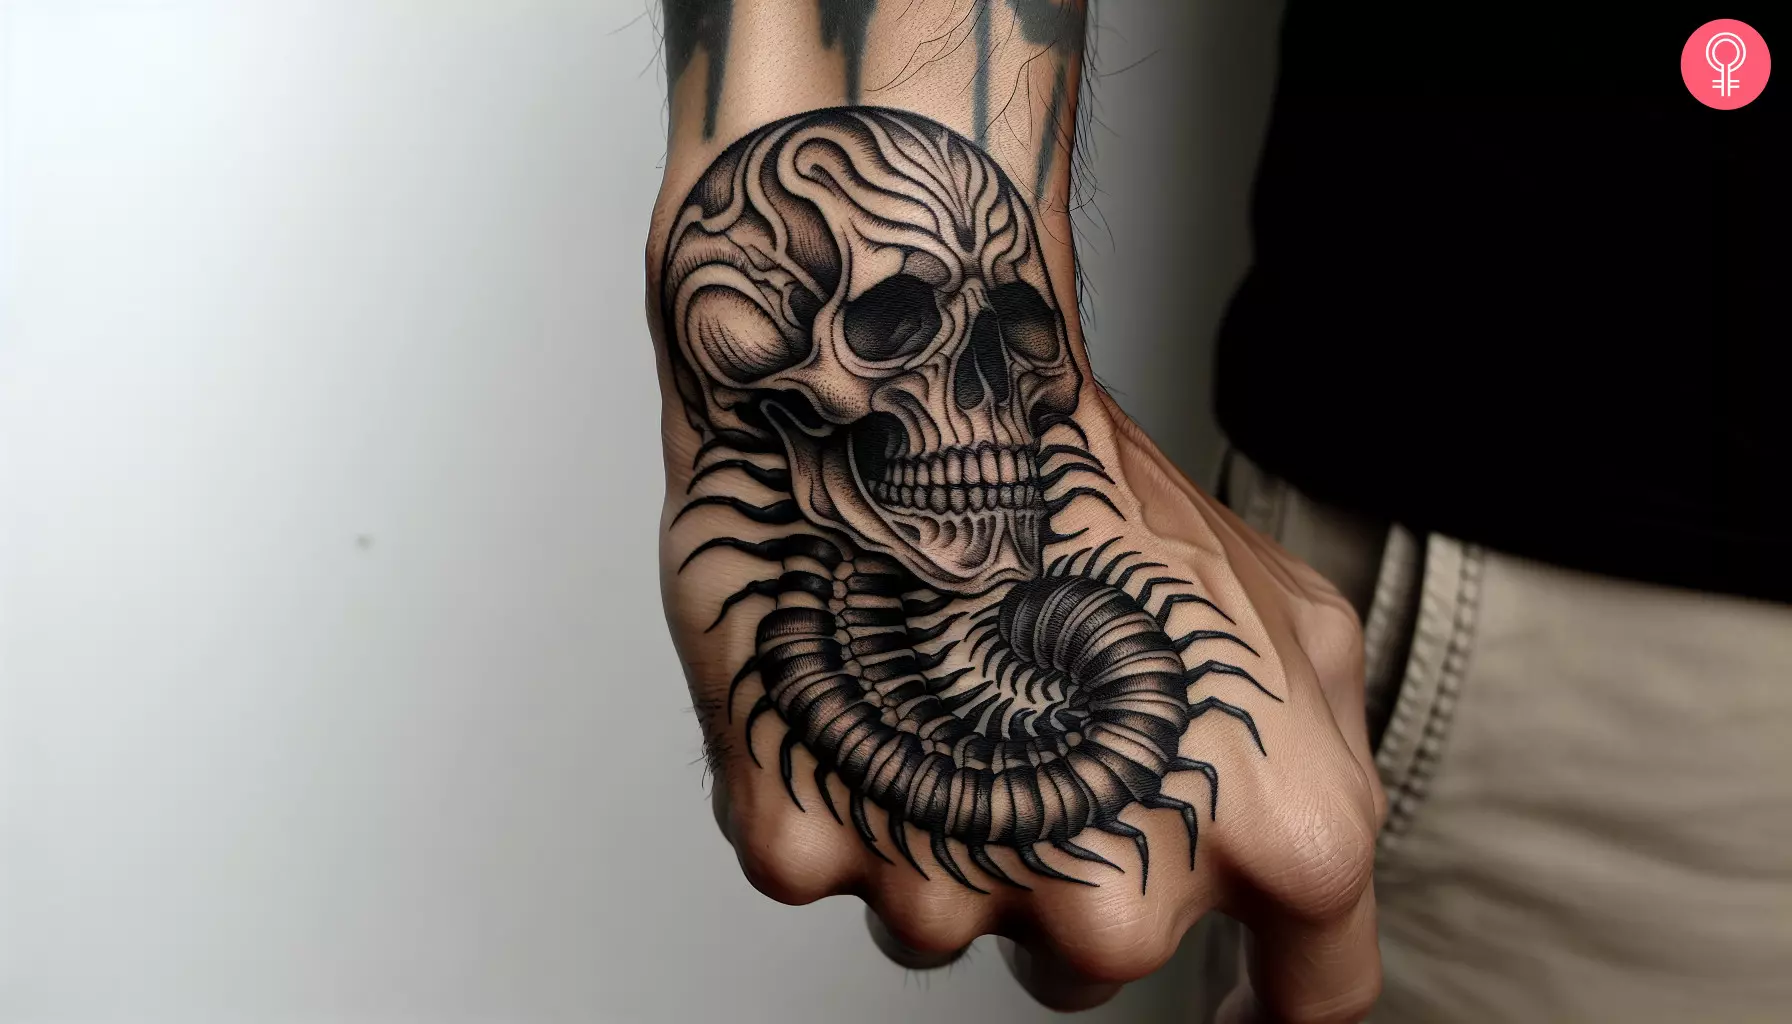 Skull centipede tattoo on the back of the palm